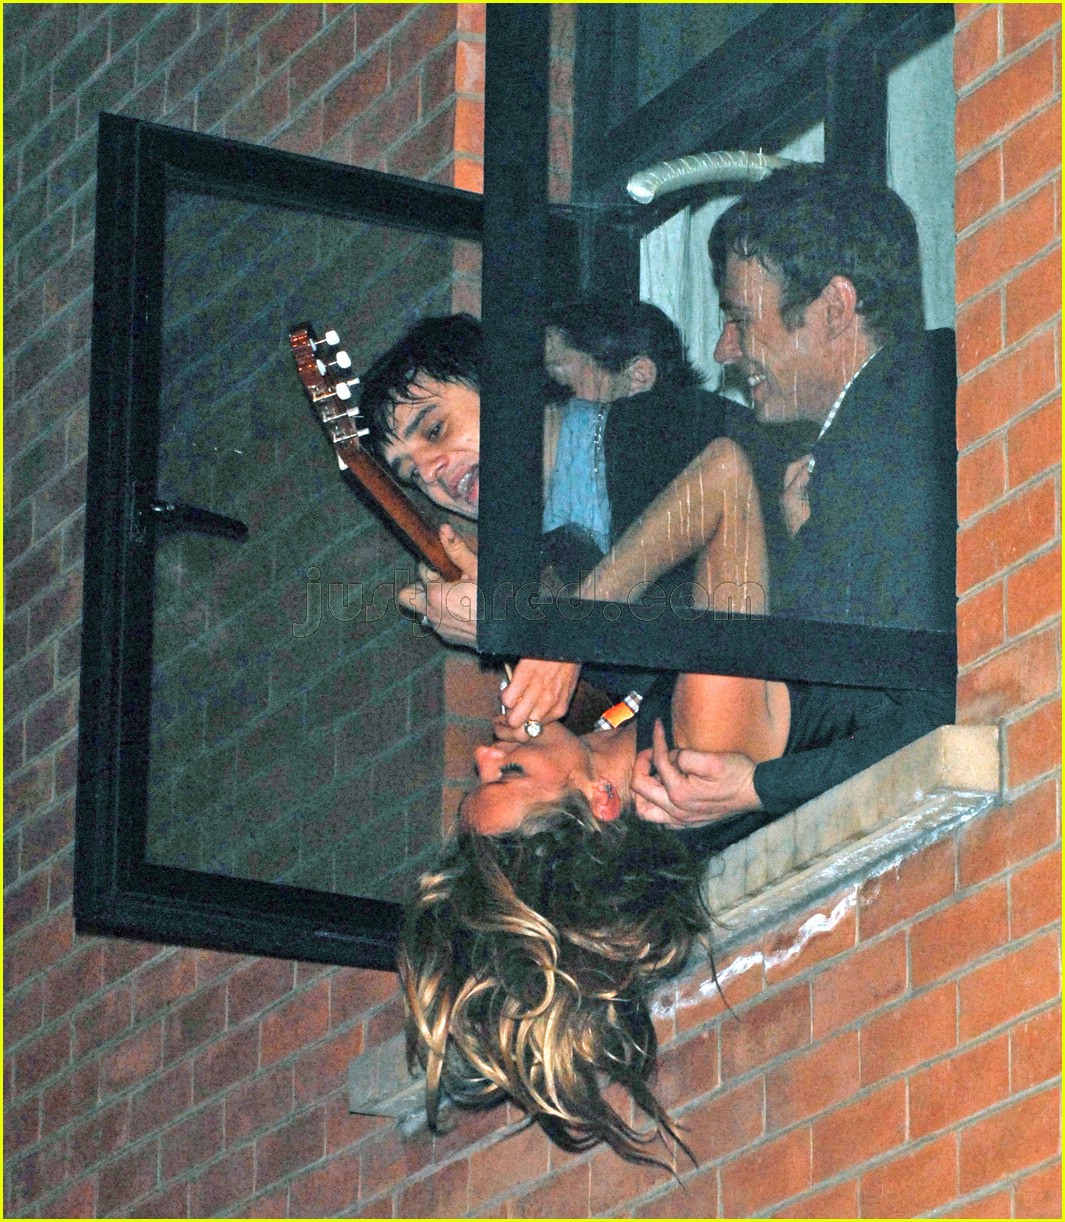 [kate-moss-hanging-out-window-03.jpg]